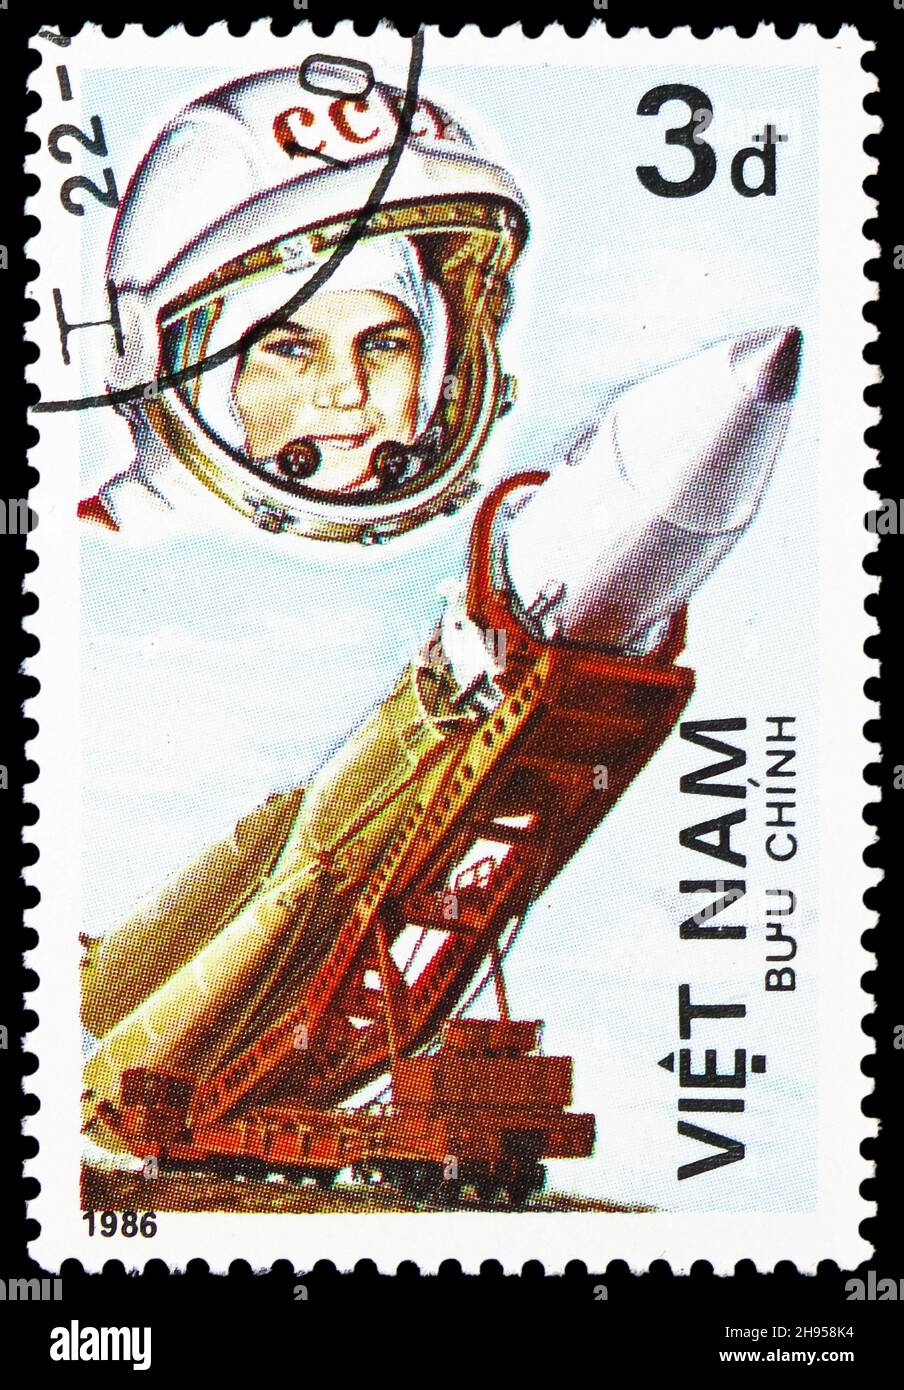 MOSCOW, RUSSIA - OCTOBER 24, 2021: Postage stamp printed in Vietnam shows Walentina Tereshkova, Vostok VI, 25 Years of Human Spaceflight serie, circa Stock Photo